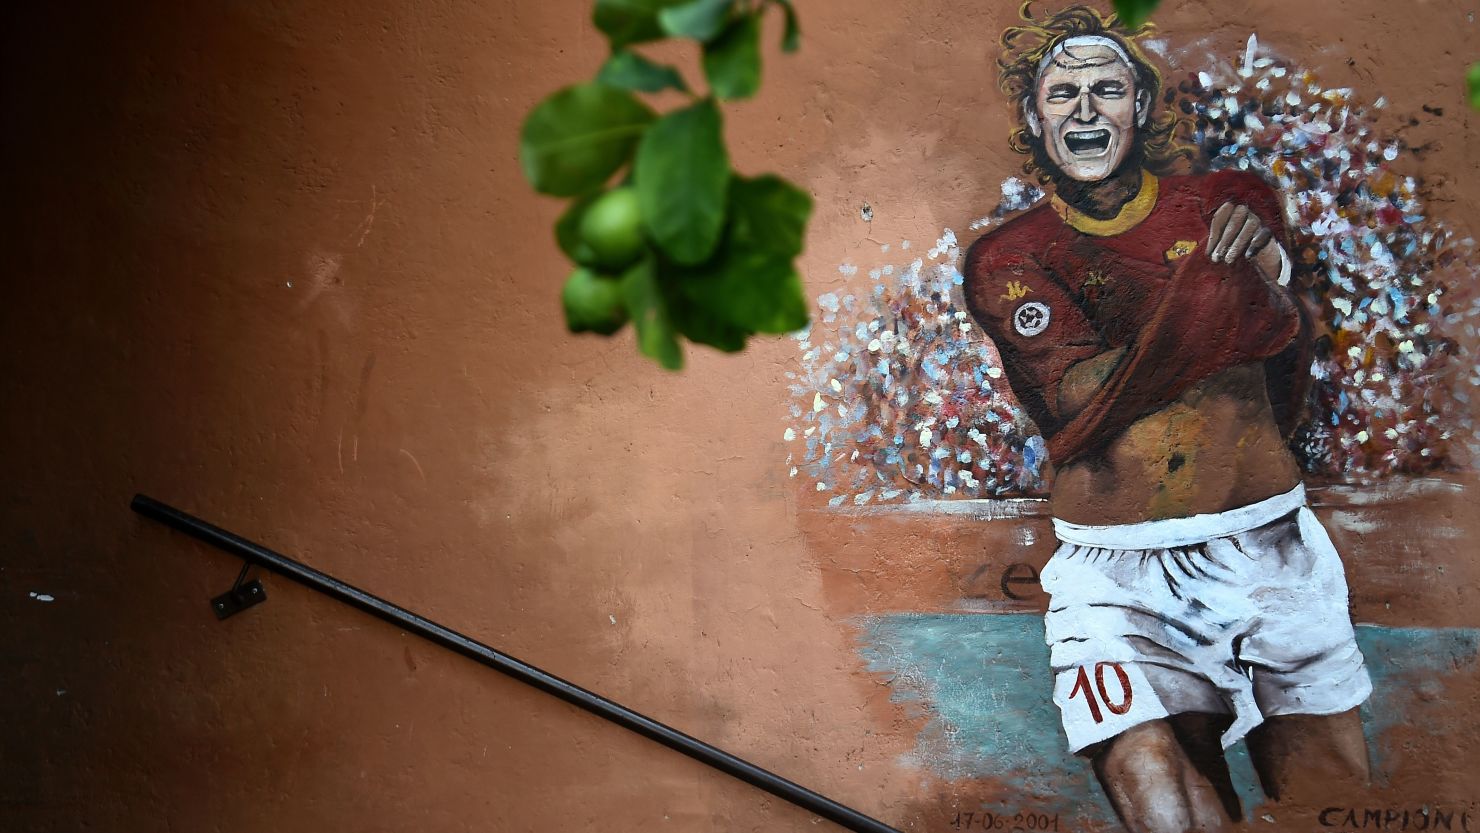 A graffiti representing AS Roma's captain Francesco Totti is seen on a wall in the Garbatella district, on October 22, 2016 in Rome. Rome's football teams will play their derby Lazio vs AS Roma on December 4, 2016.  / AFP / FILIPPO MONTEFORTE        (Photo credit should read FILIPPO MONTEFORTE/AFP/Getty Images)